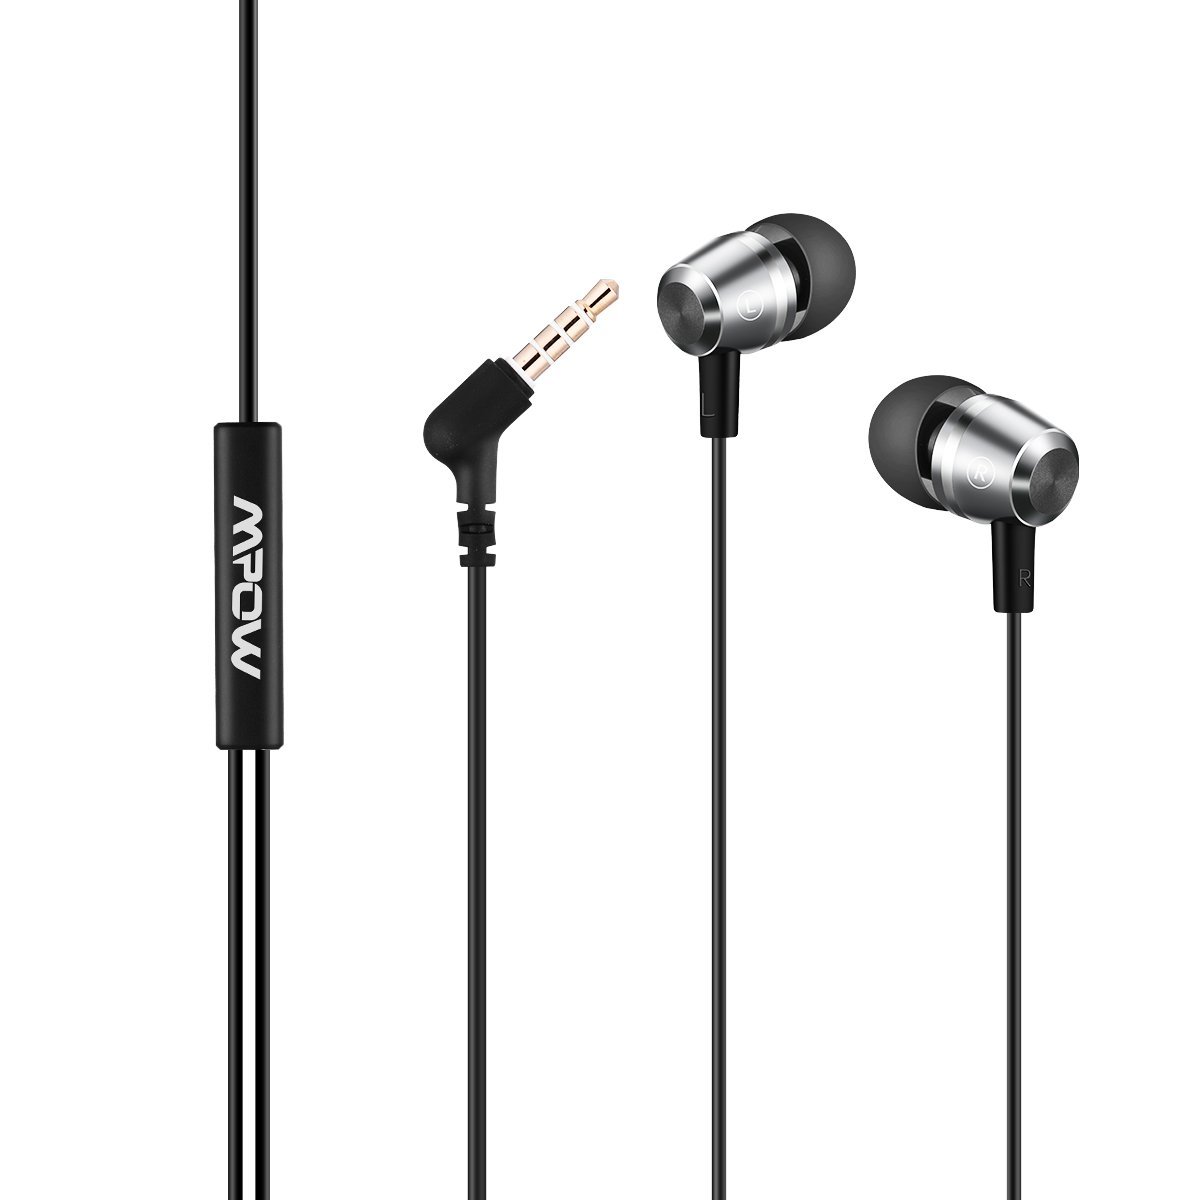 Mpow Earphones Headset for Music Running Travel with In-line Mic, Volume Control